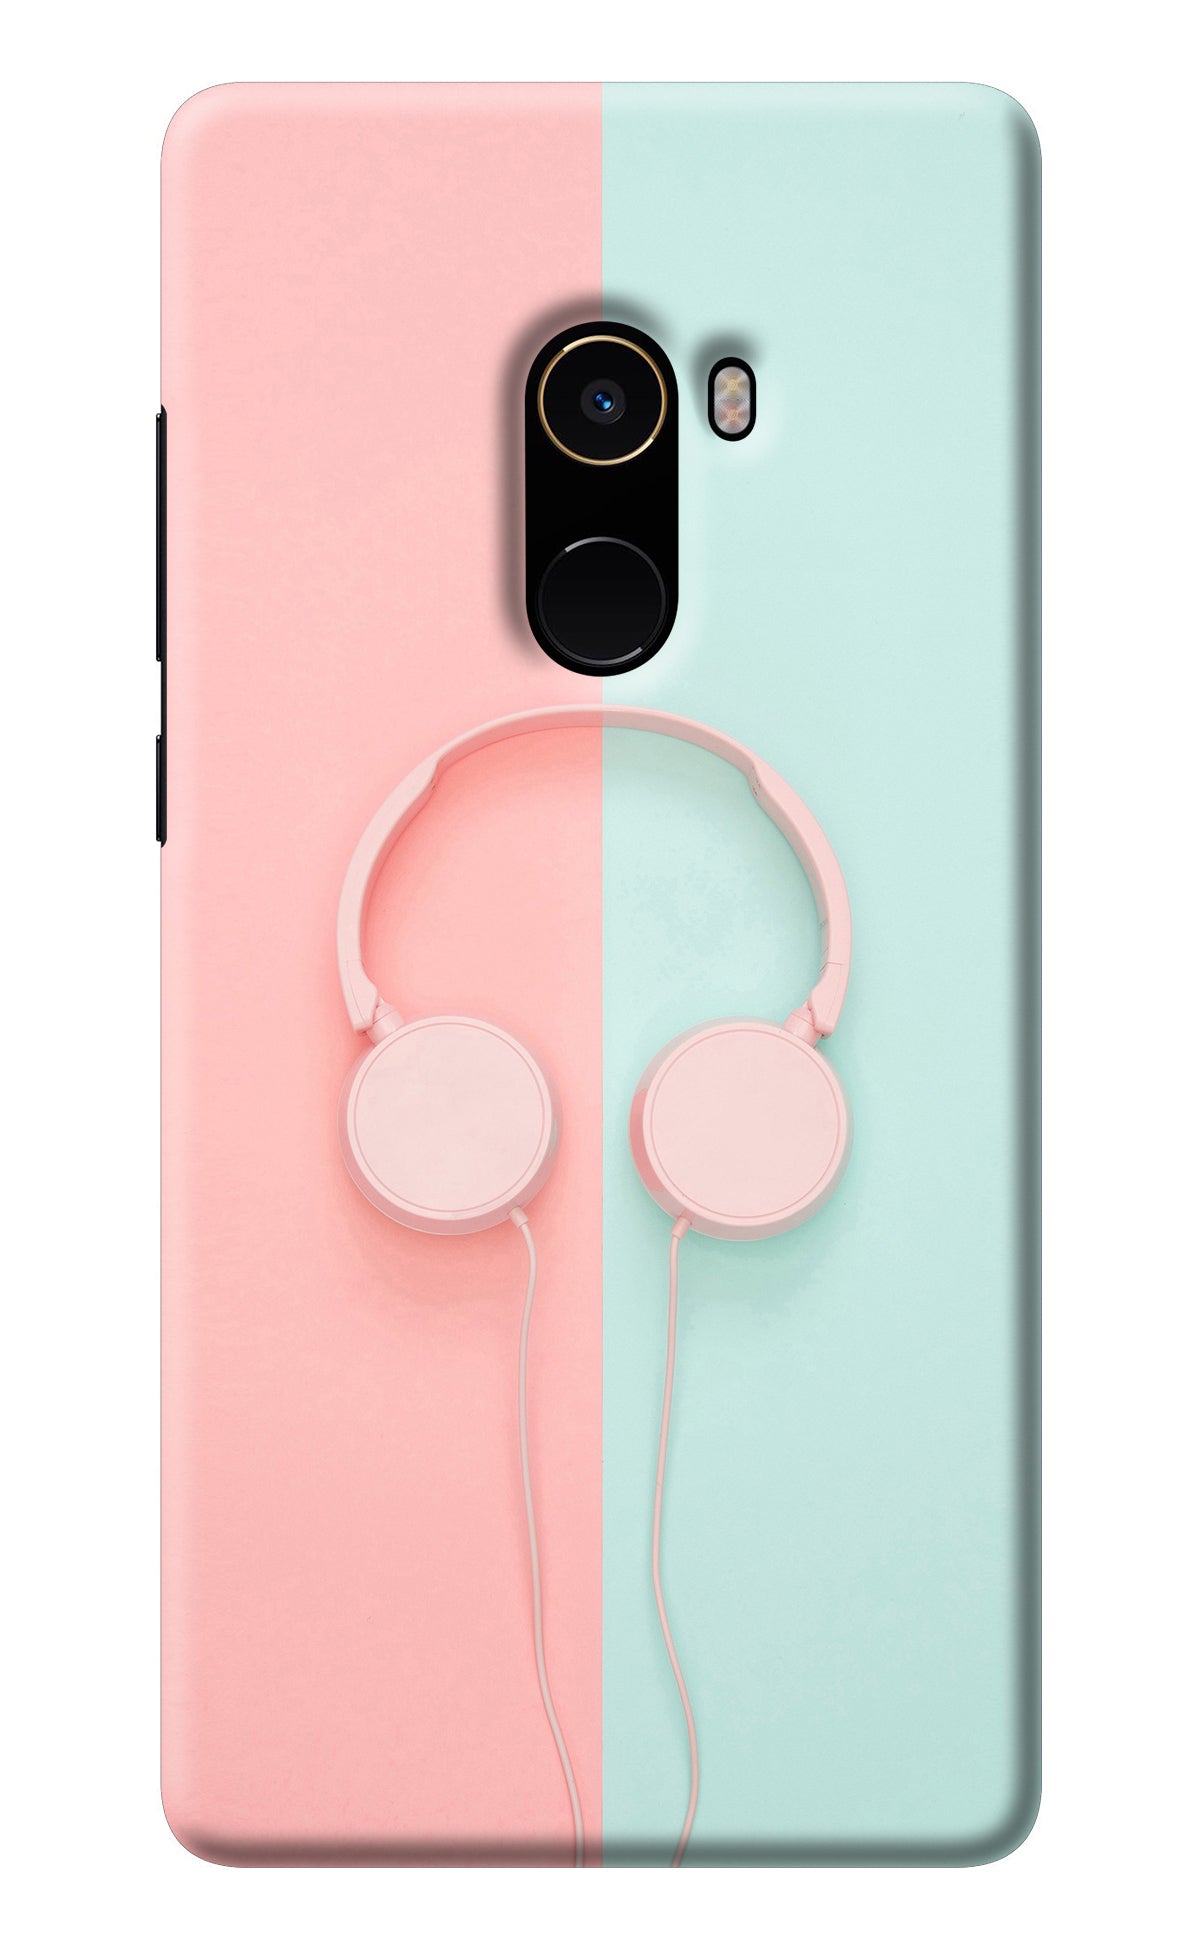 Music Lover Mi Mix 2 Back Cover